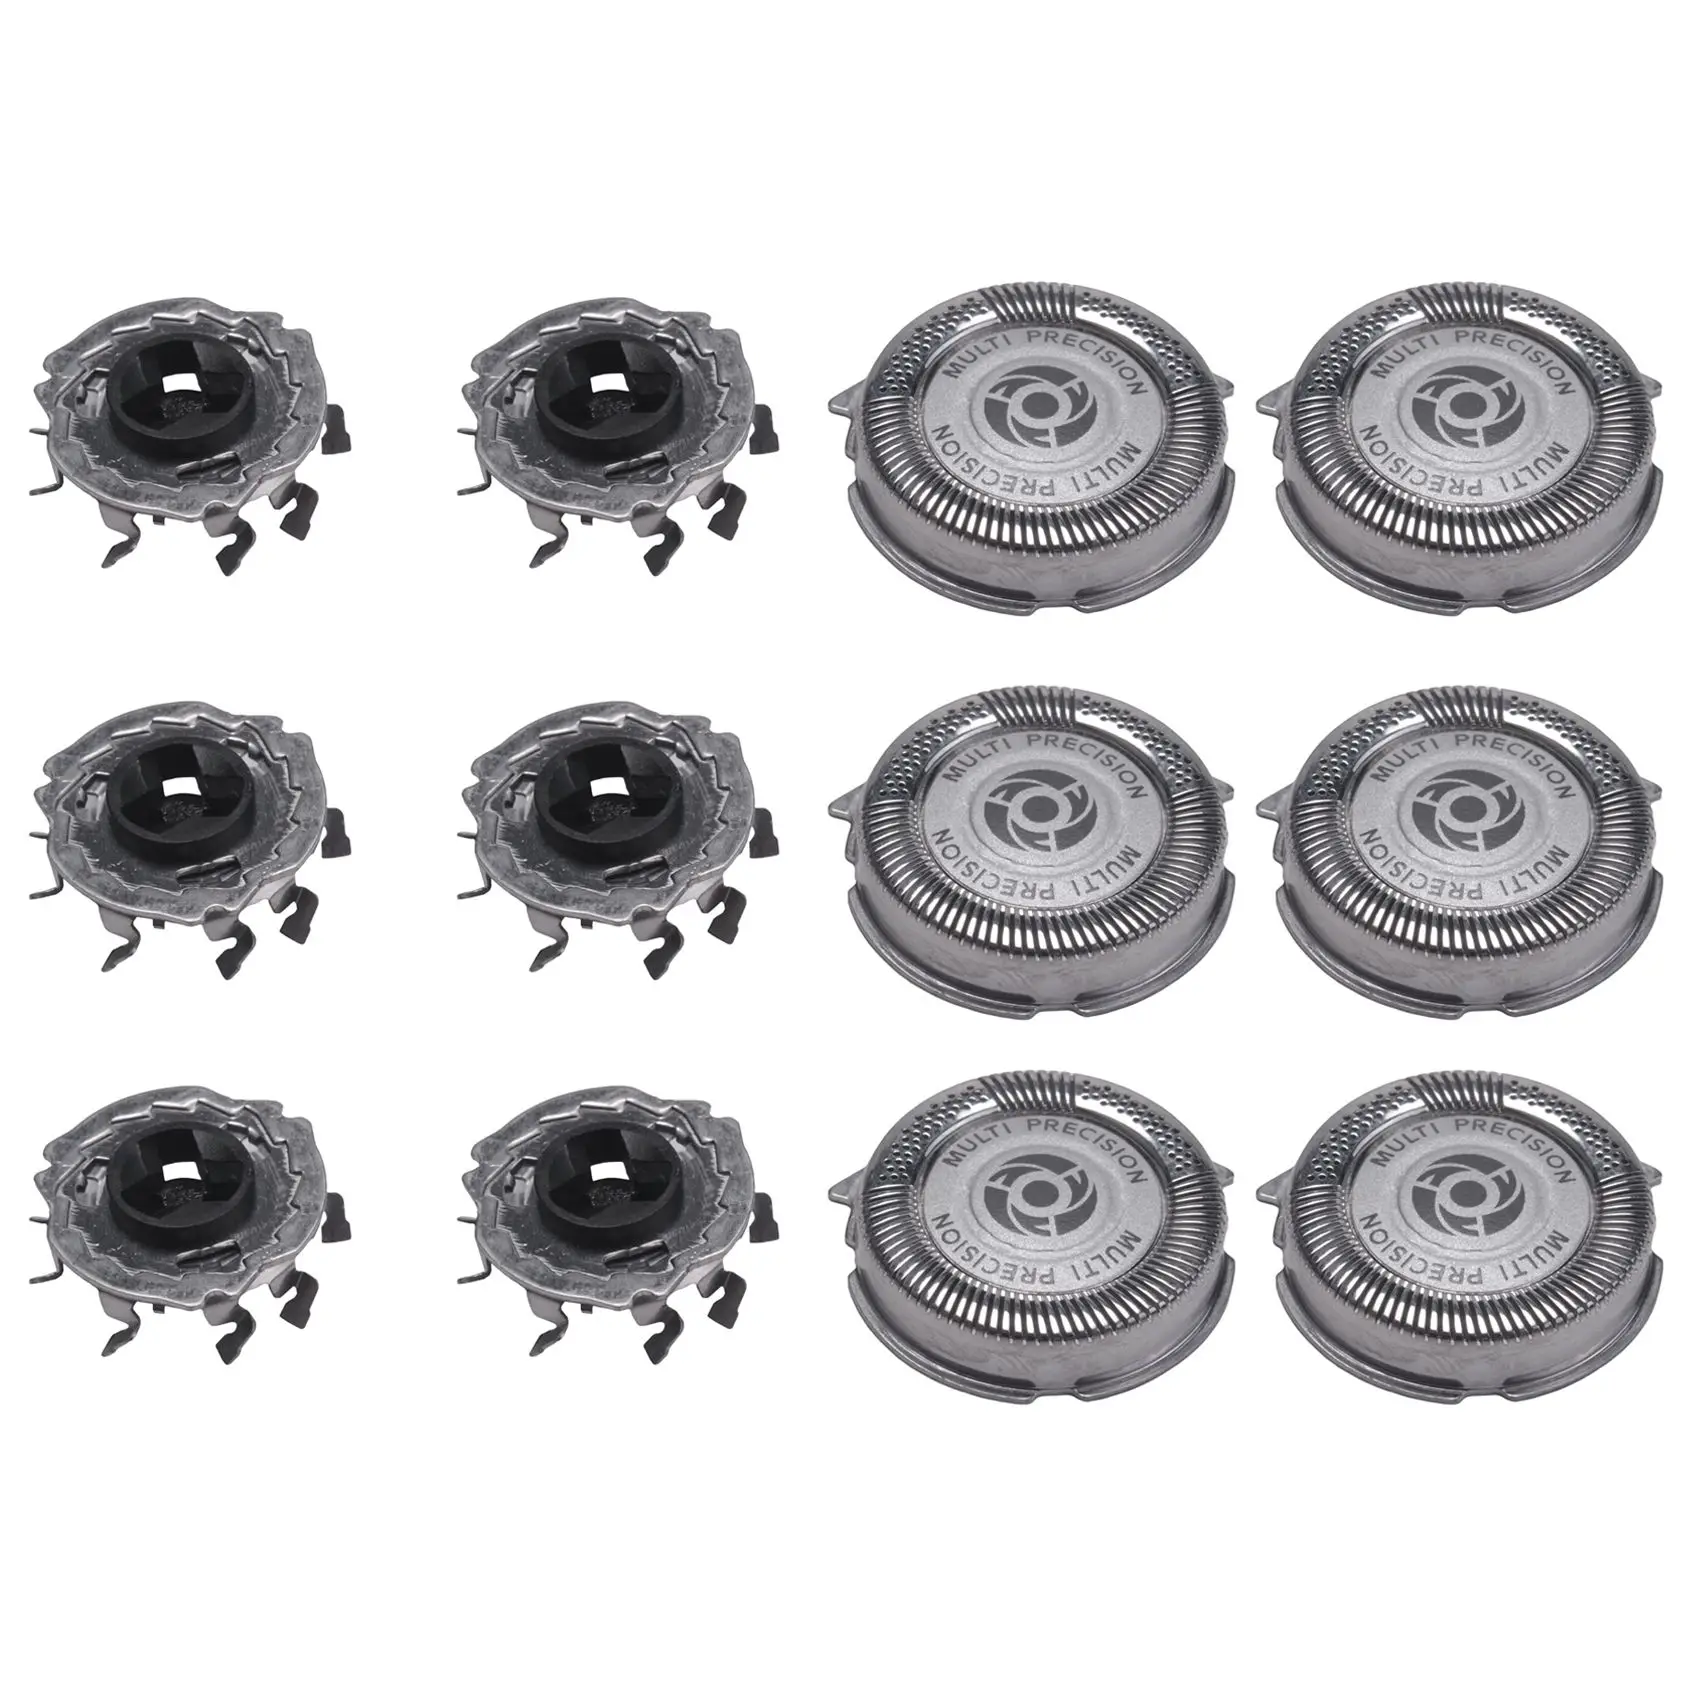 

6 Pack SH50 Replacement Heads for Philips Norelco Series 5000 Shavers, S5000 S5420 S5380 S5351 MultiPrecision Blades